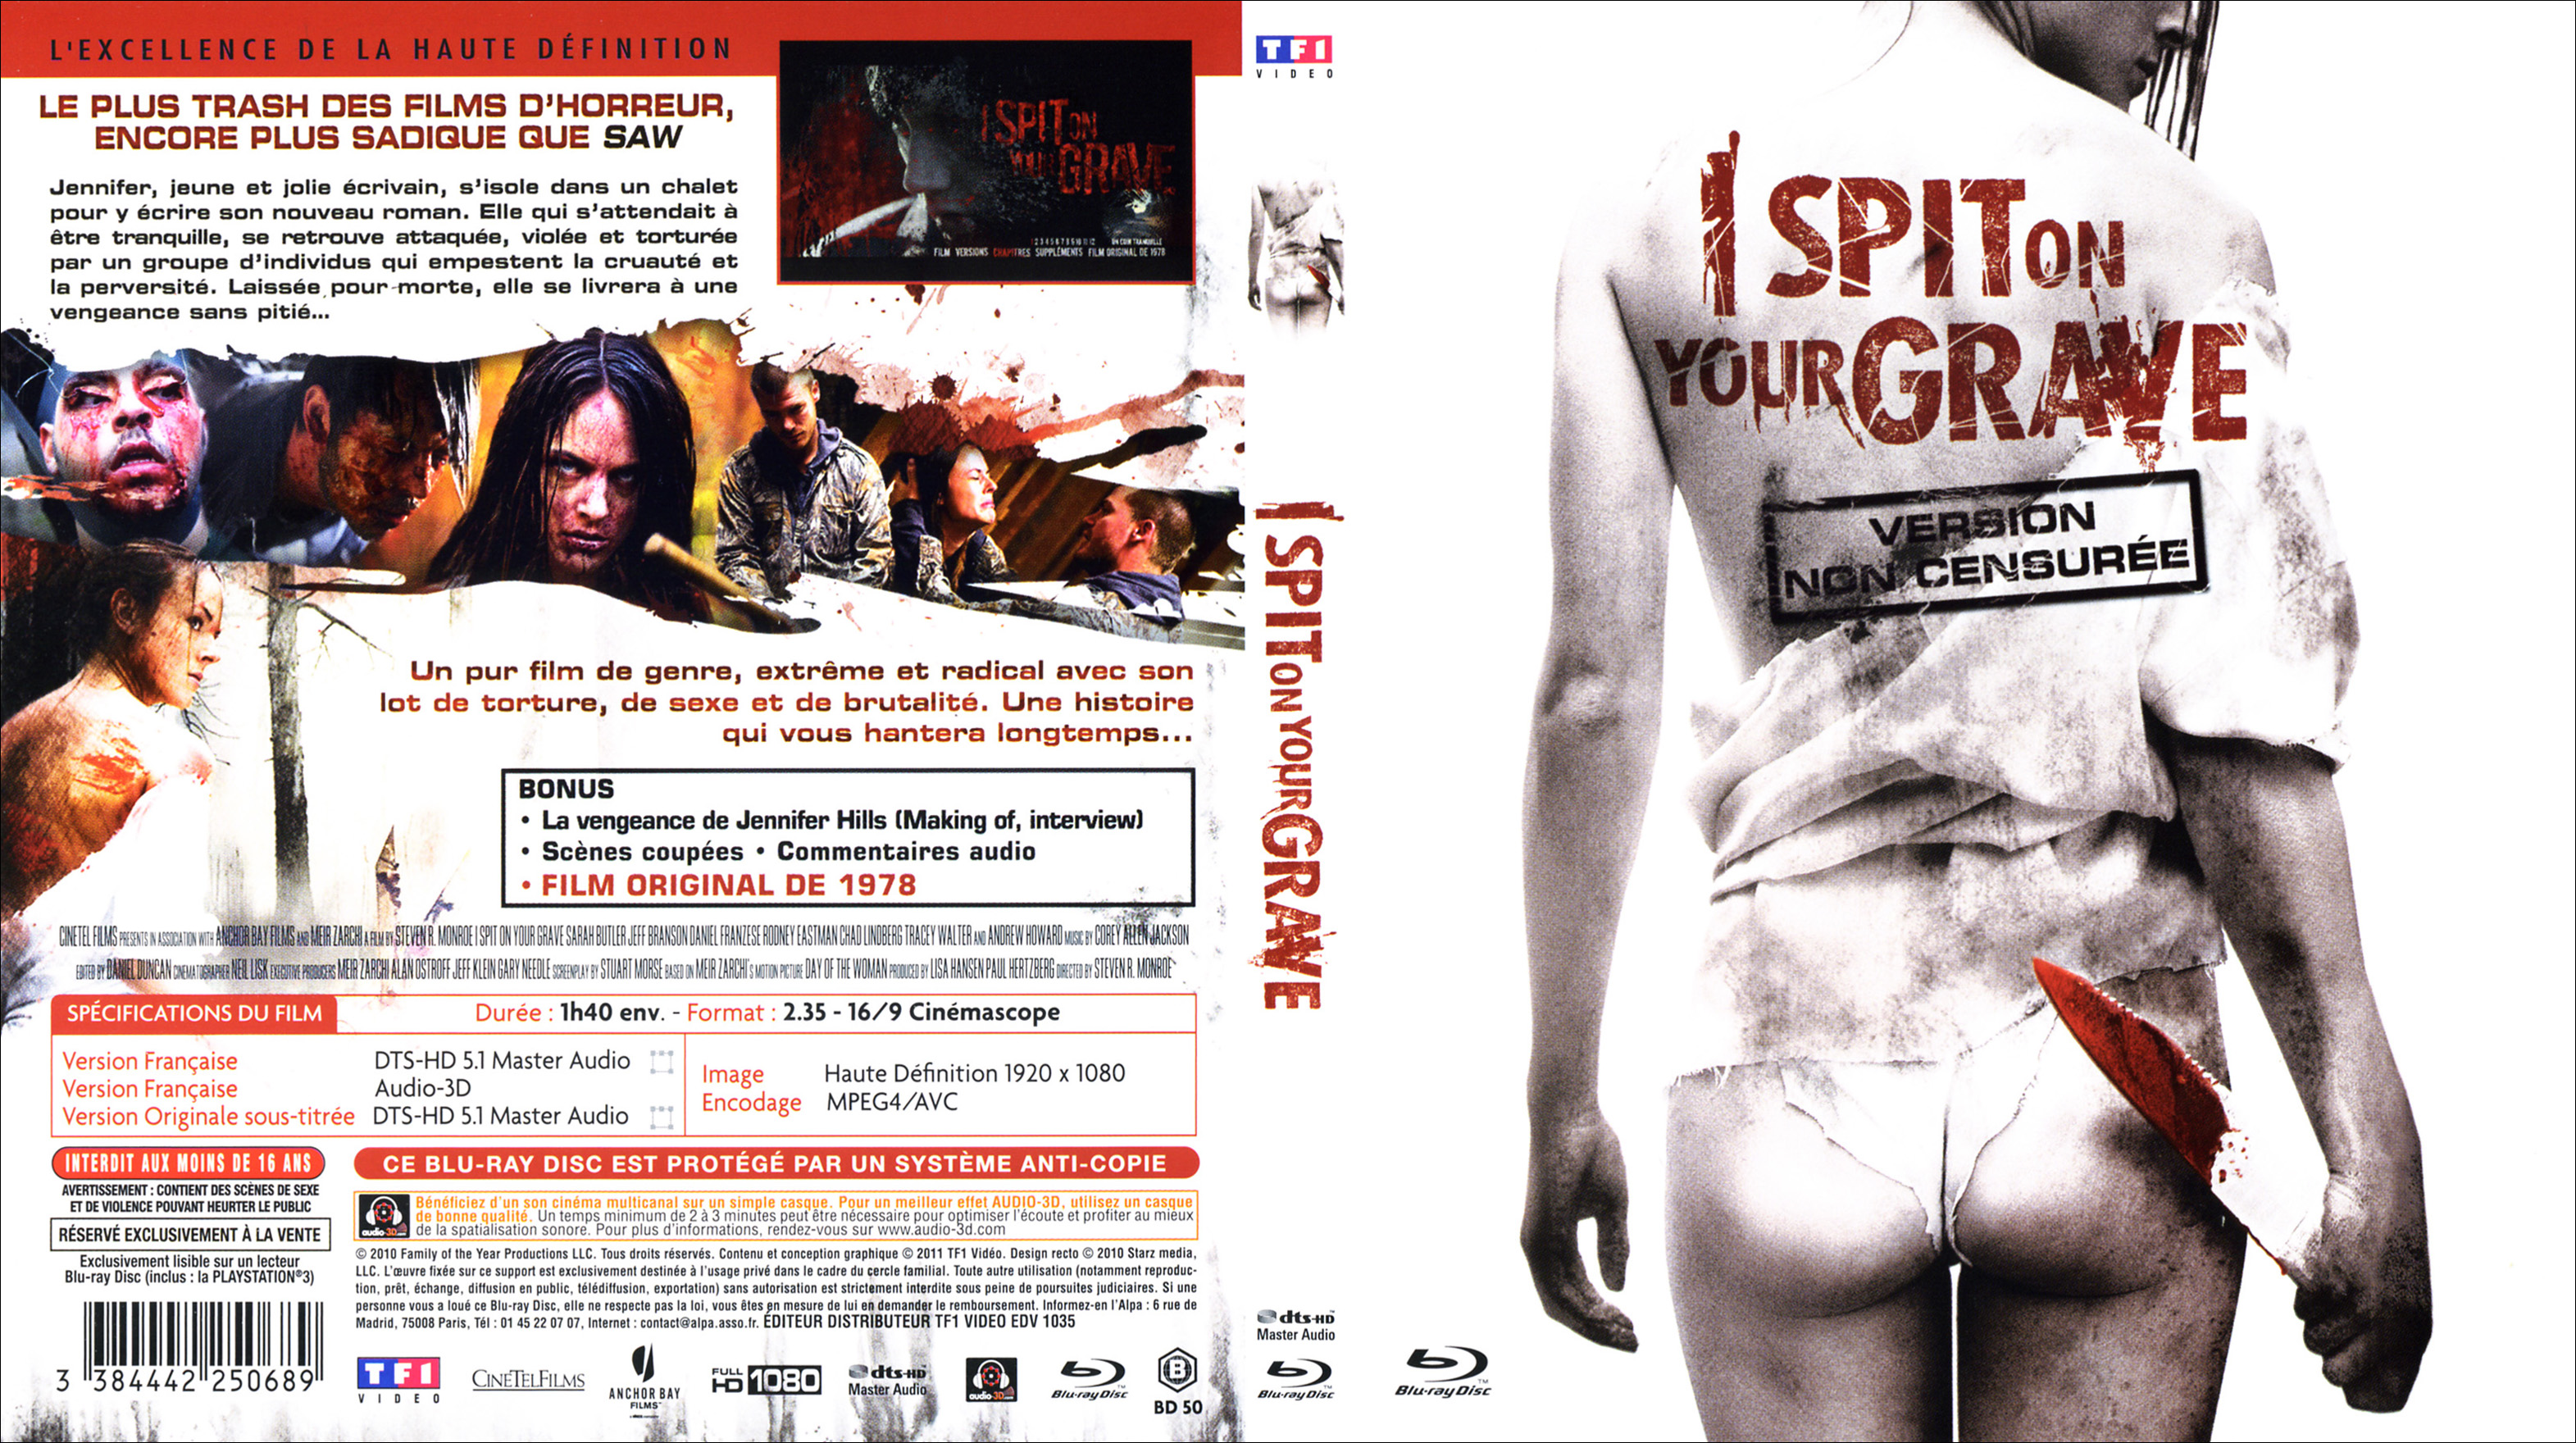 Jaquette DVD I spit on your grave (BLU-RAY)